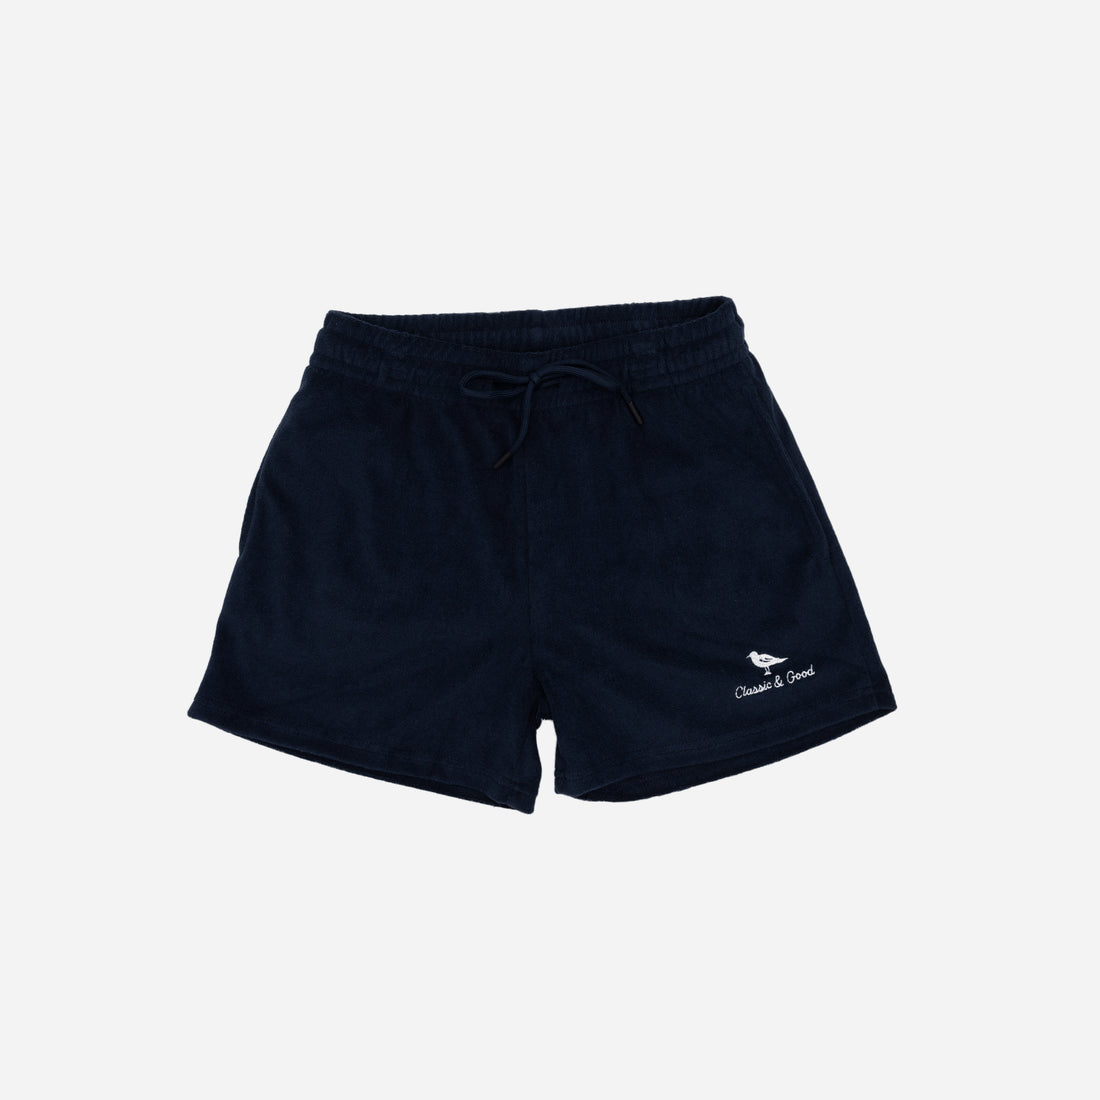 Women's Luxe Classic & Good Terry Cloth Shorts